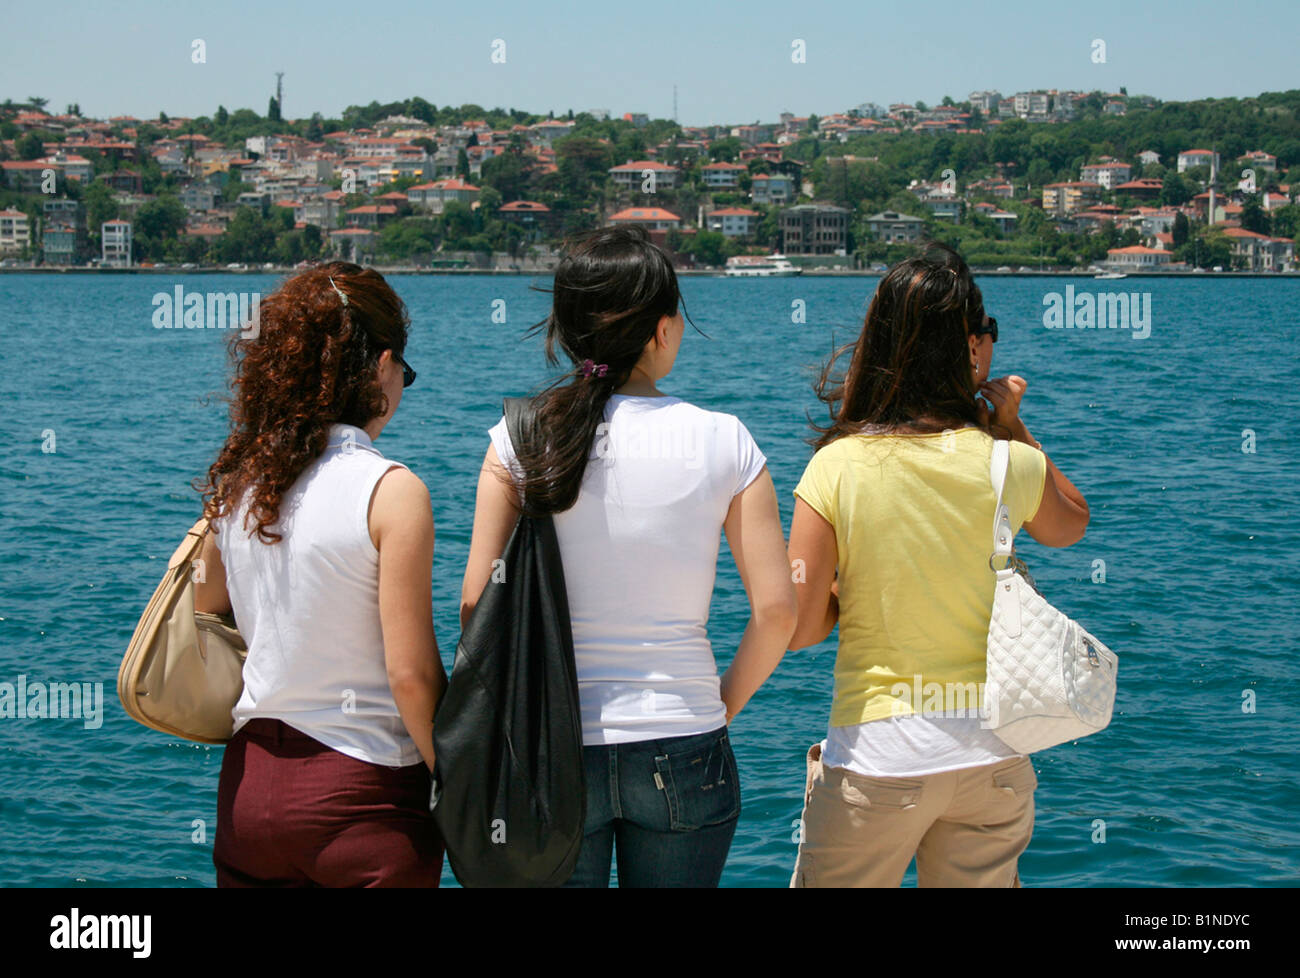 3 Turkish girls standing in front of the Bosphorus waiting for the ferry Stock Photo